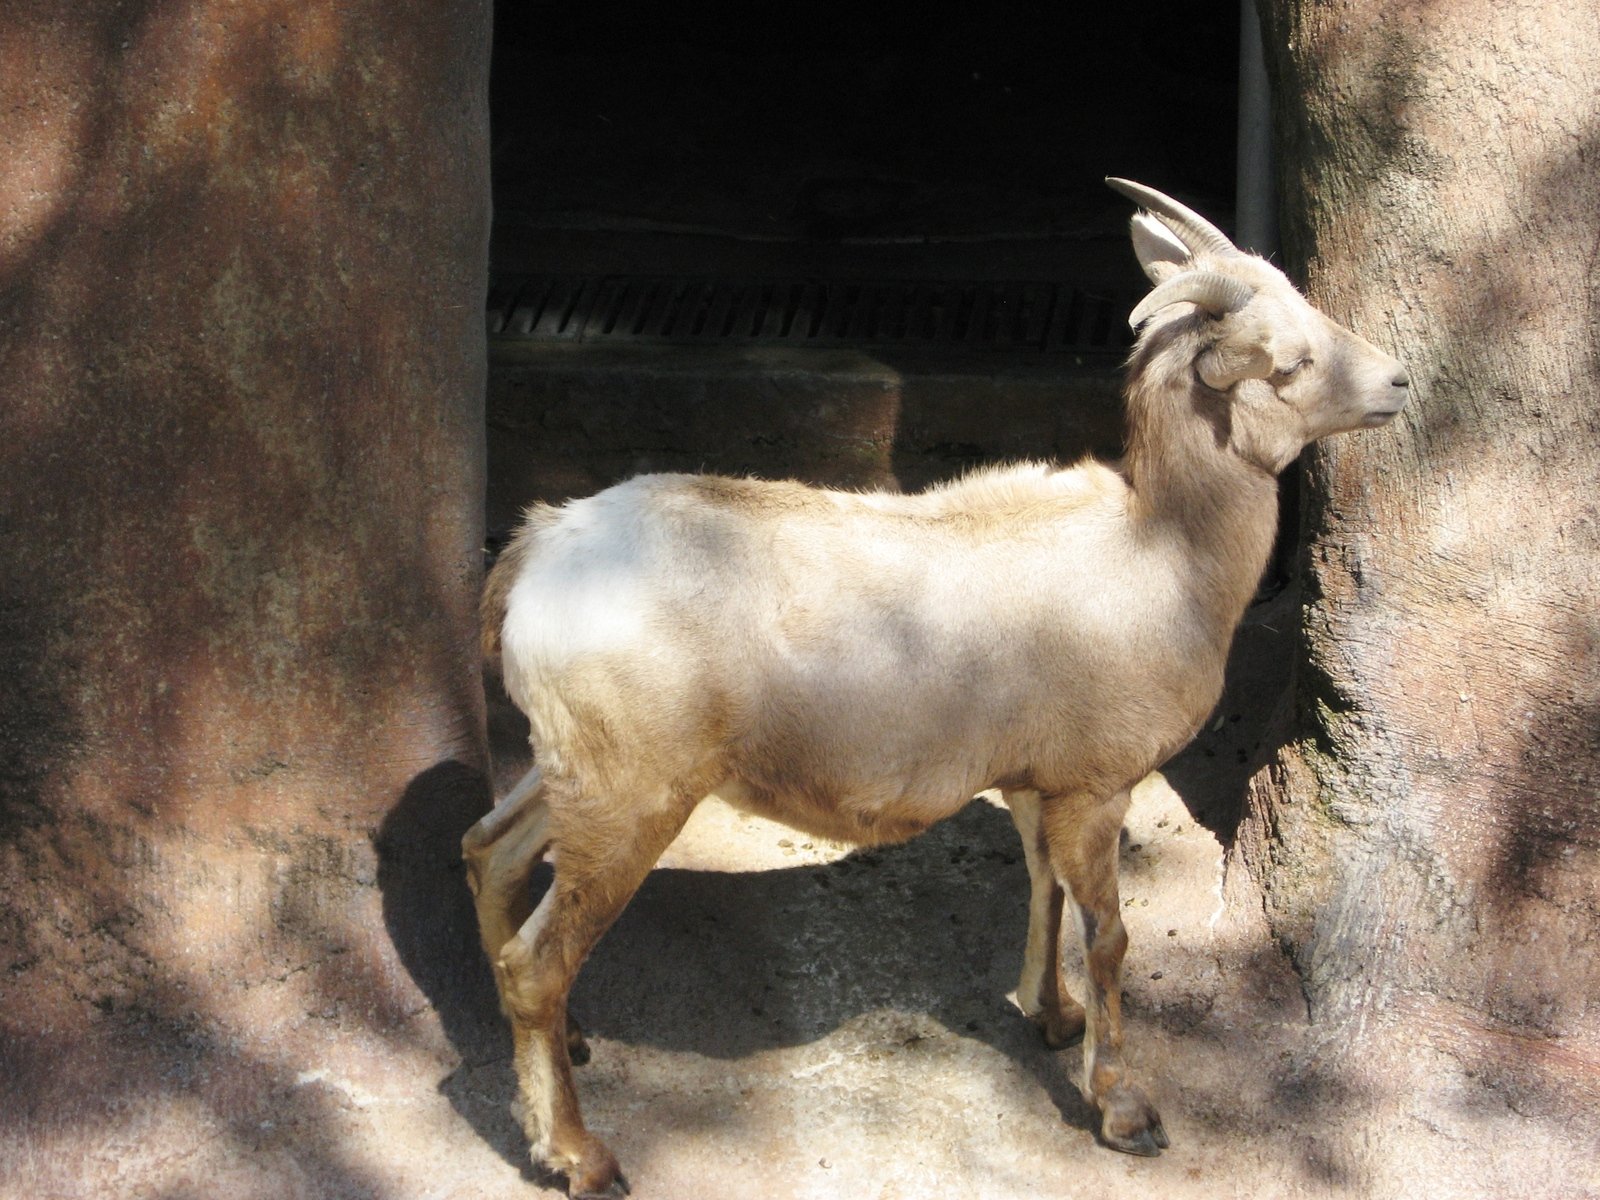 an animal that is outside its stall looking at the pographer